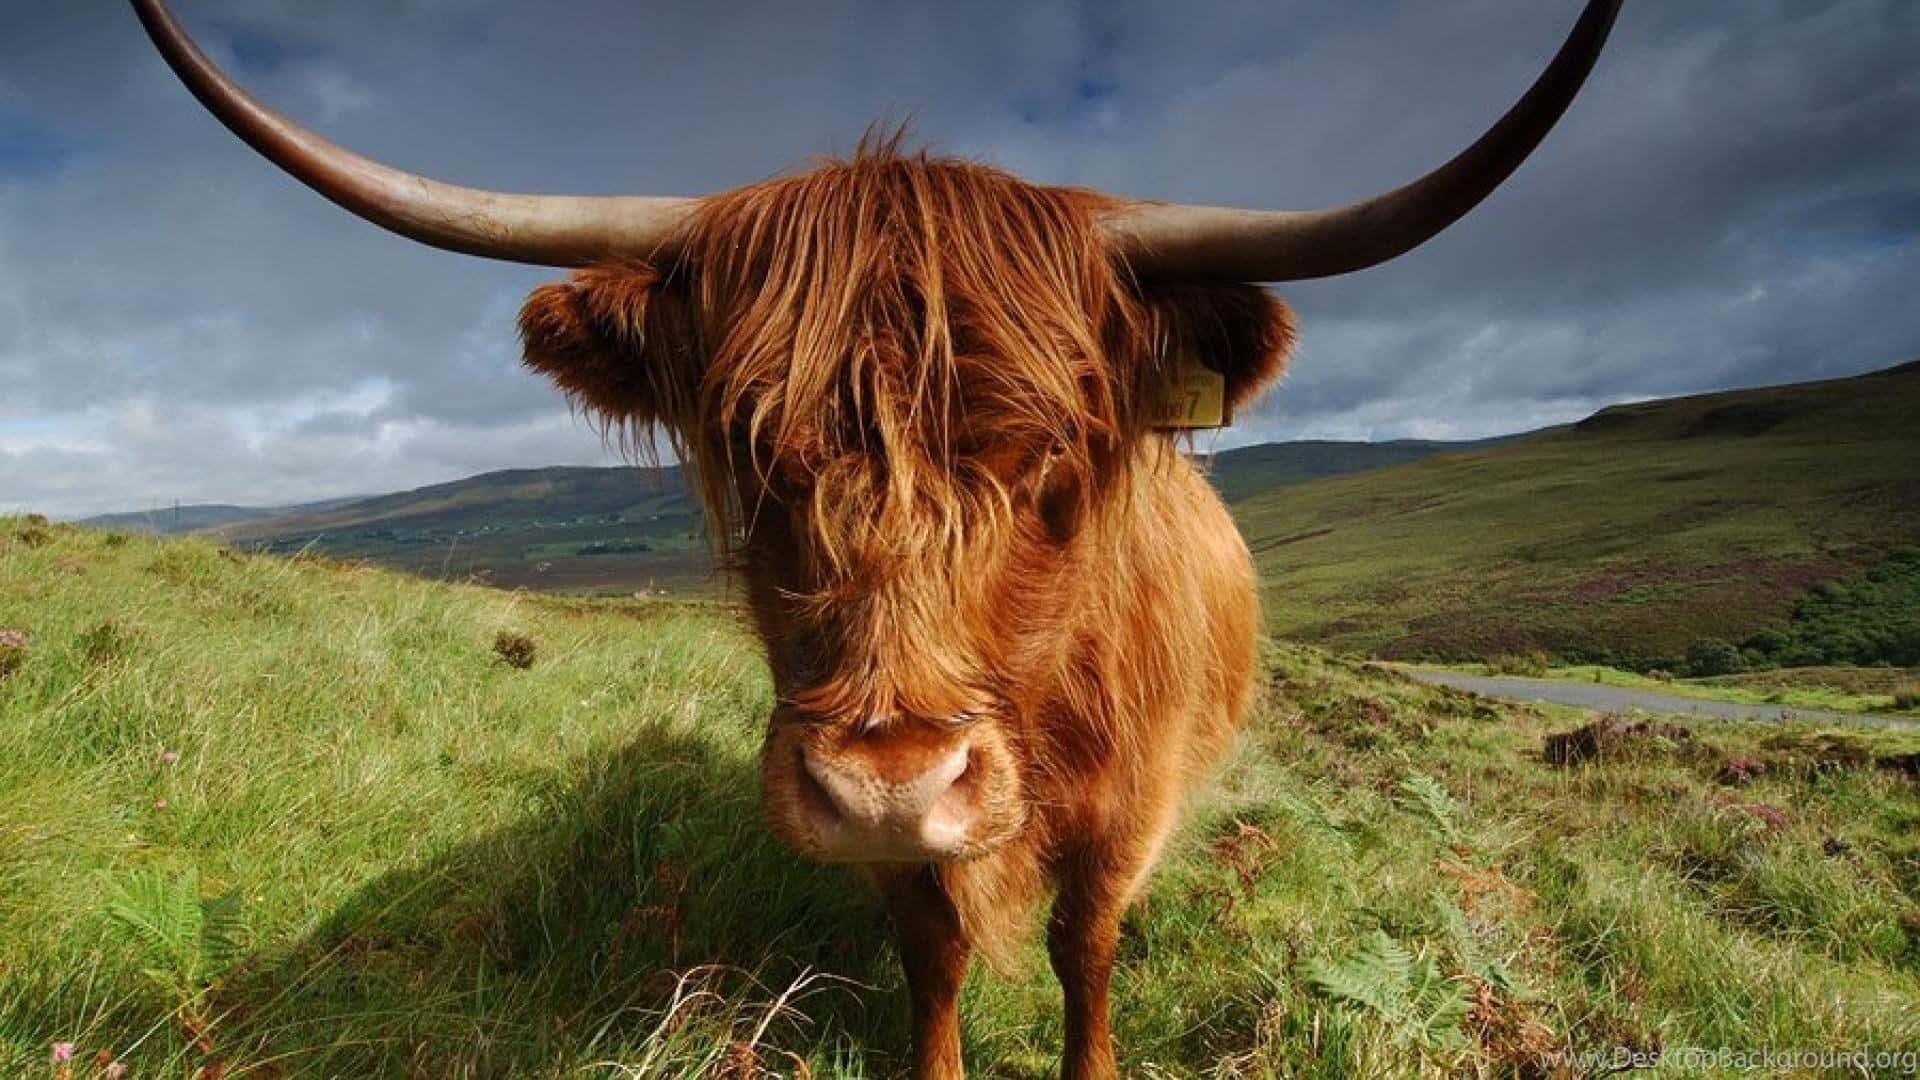 Majestic Highland Cow in a Scenic Meadow